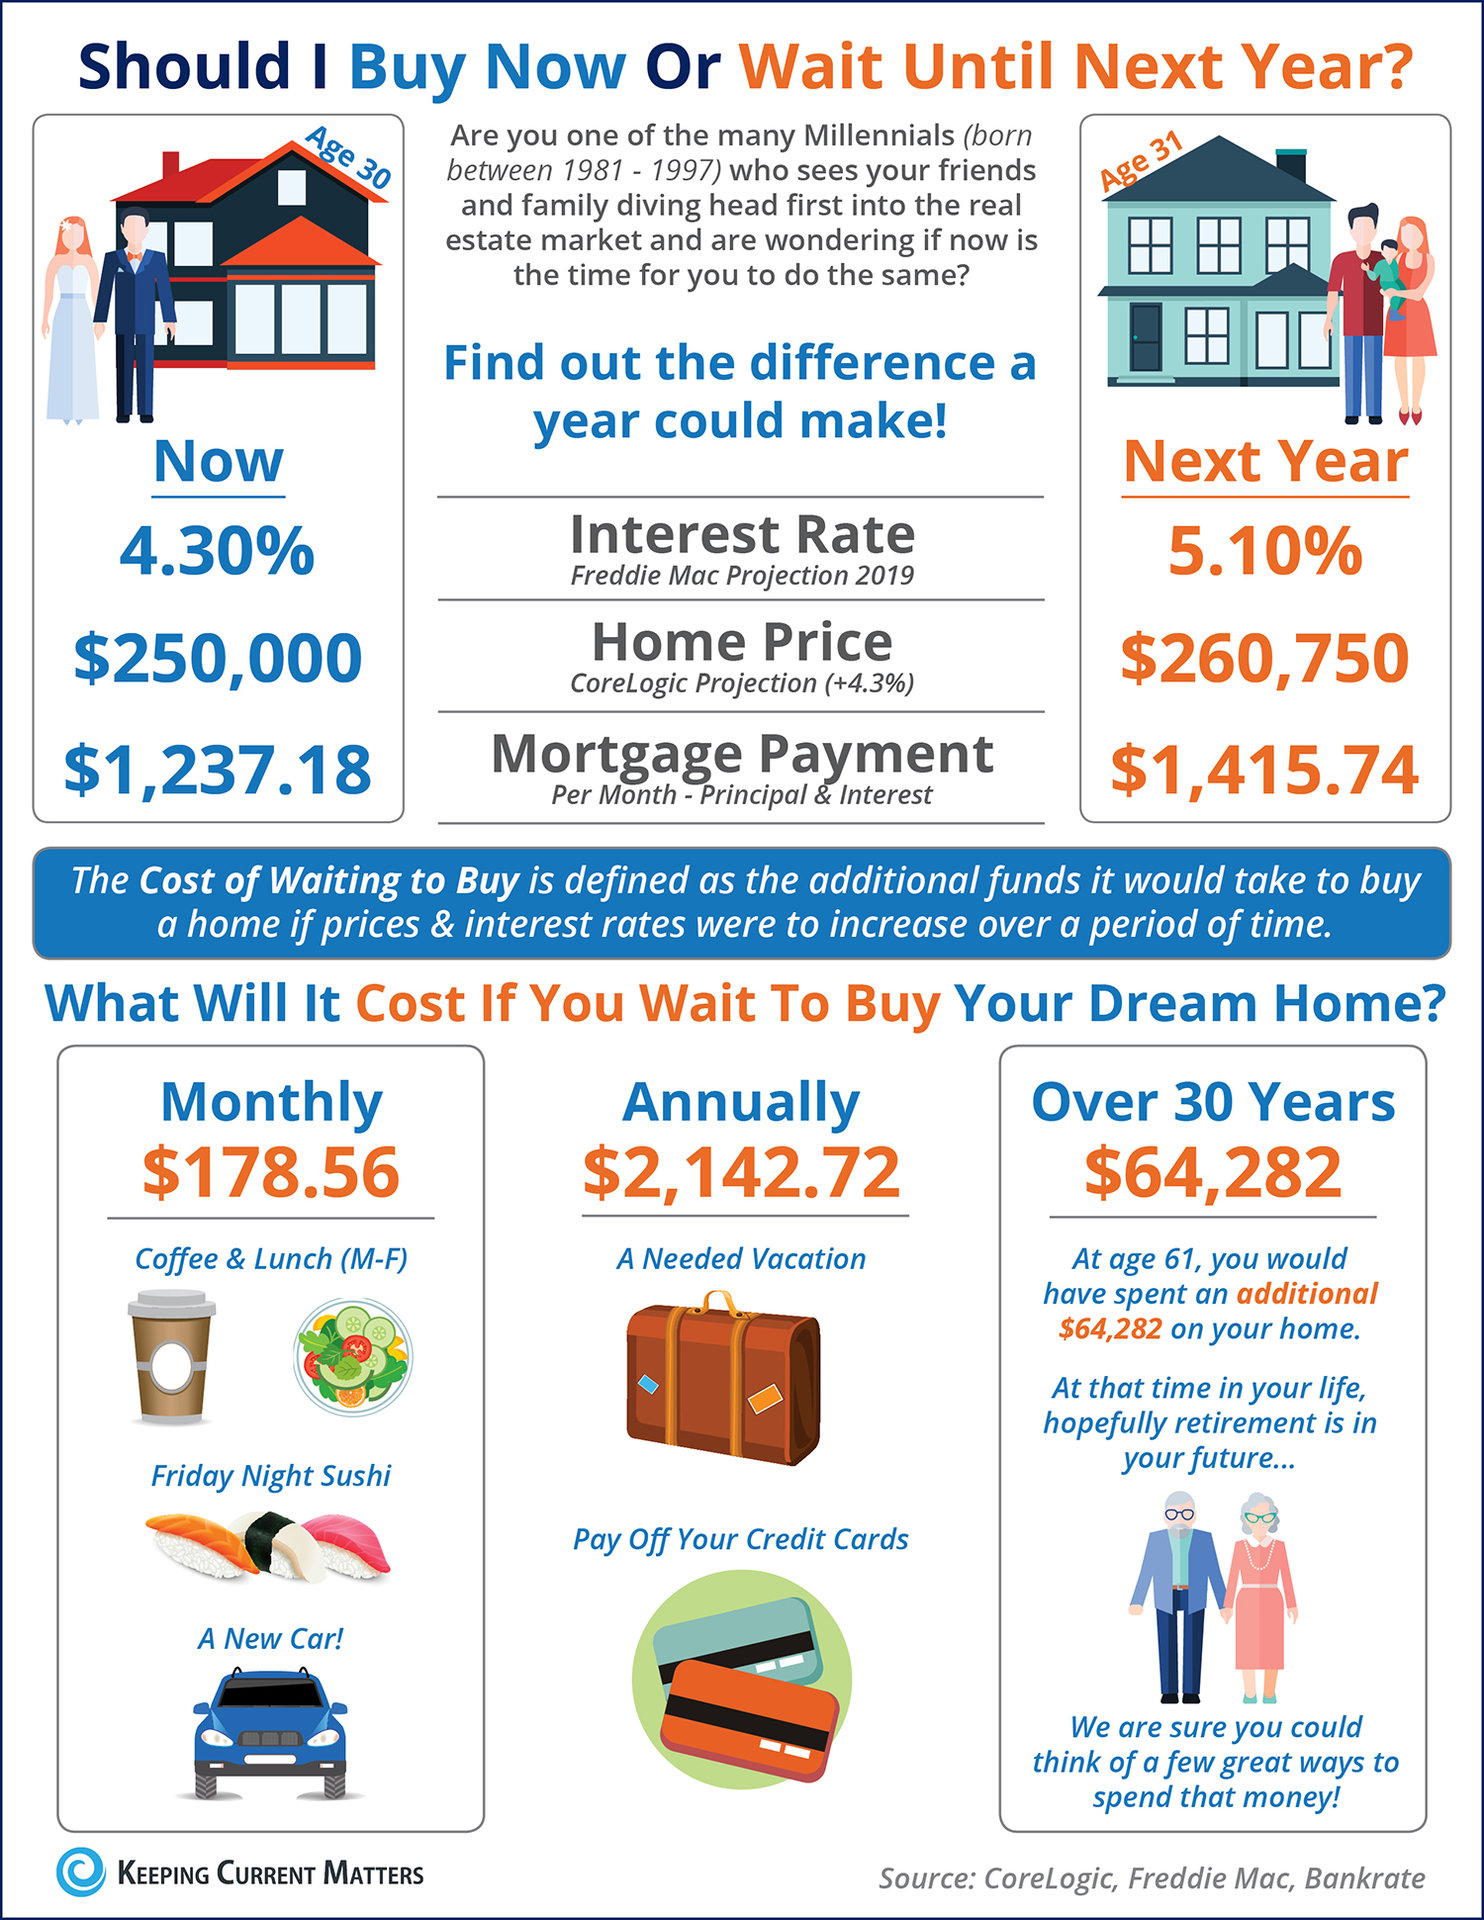 Should I Wait until next Year to Buy? Or Buy Now? [INFOGRAPHIC] | Keeping Current Matters